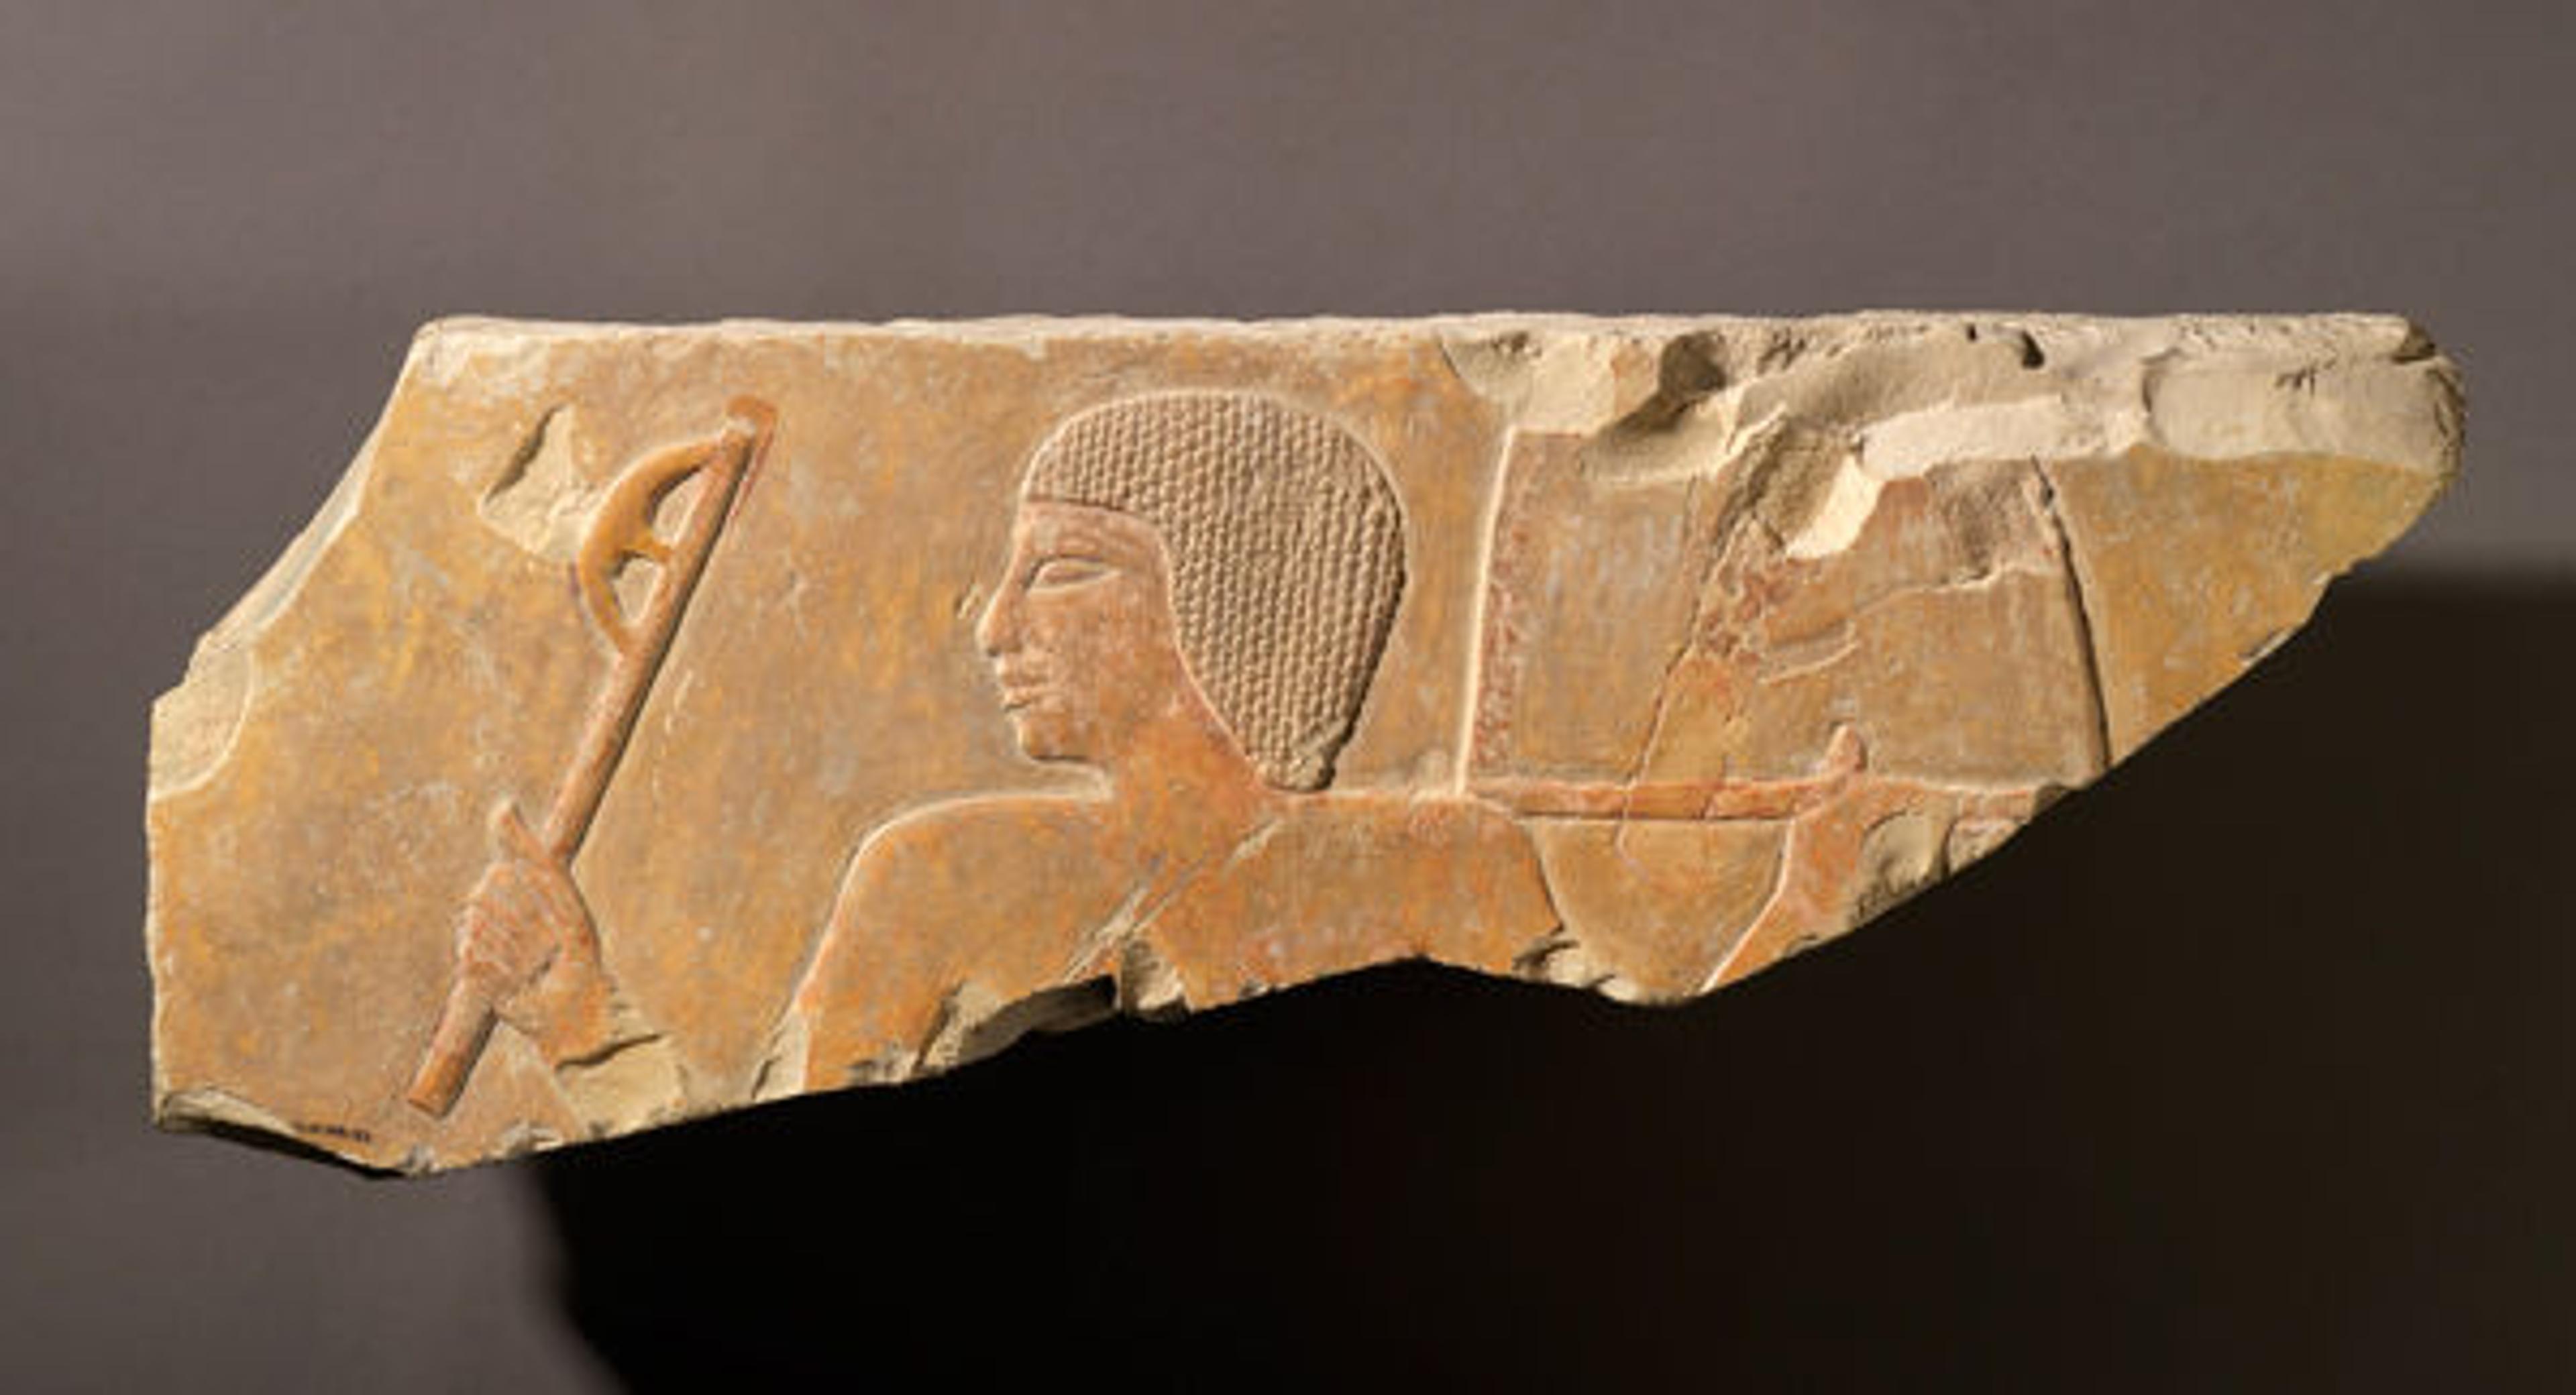 Fig. 2. Relief of a soldier with an ax. Middle Kingdom, Dynasty 11, reign of Nebhepetre Mentuhotep II (ca. 2030–2000 B.C.). Thebes, Deir el-Bahri, temple of Nebhepetre Mentuhotep II. Painted limestone; 6 1/2 x 18 7/16 in., 14.5 lb. (16.5 x 46.9 cm, 6.6 kg). Royal Ontario Museum, Toronto (910.34.53) Photo © Royal Ontario Museum